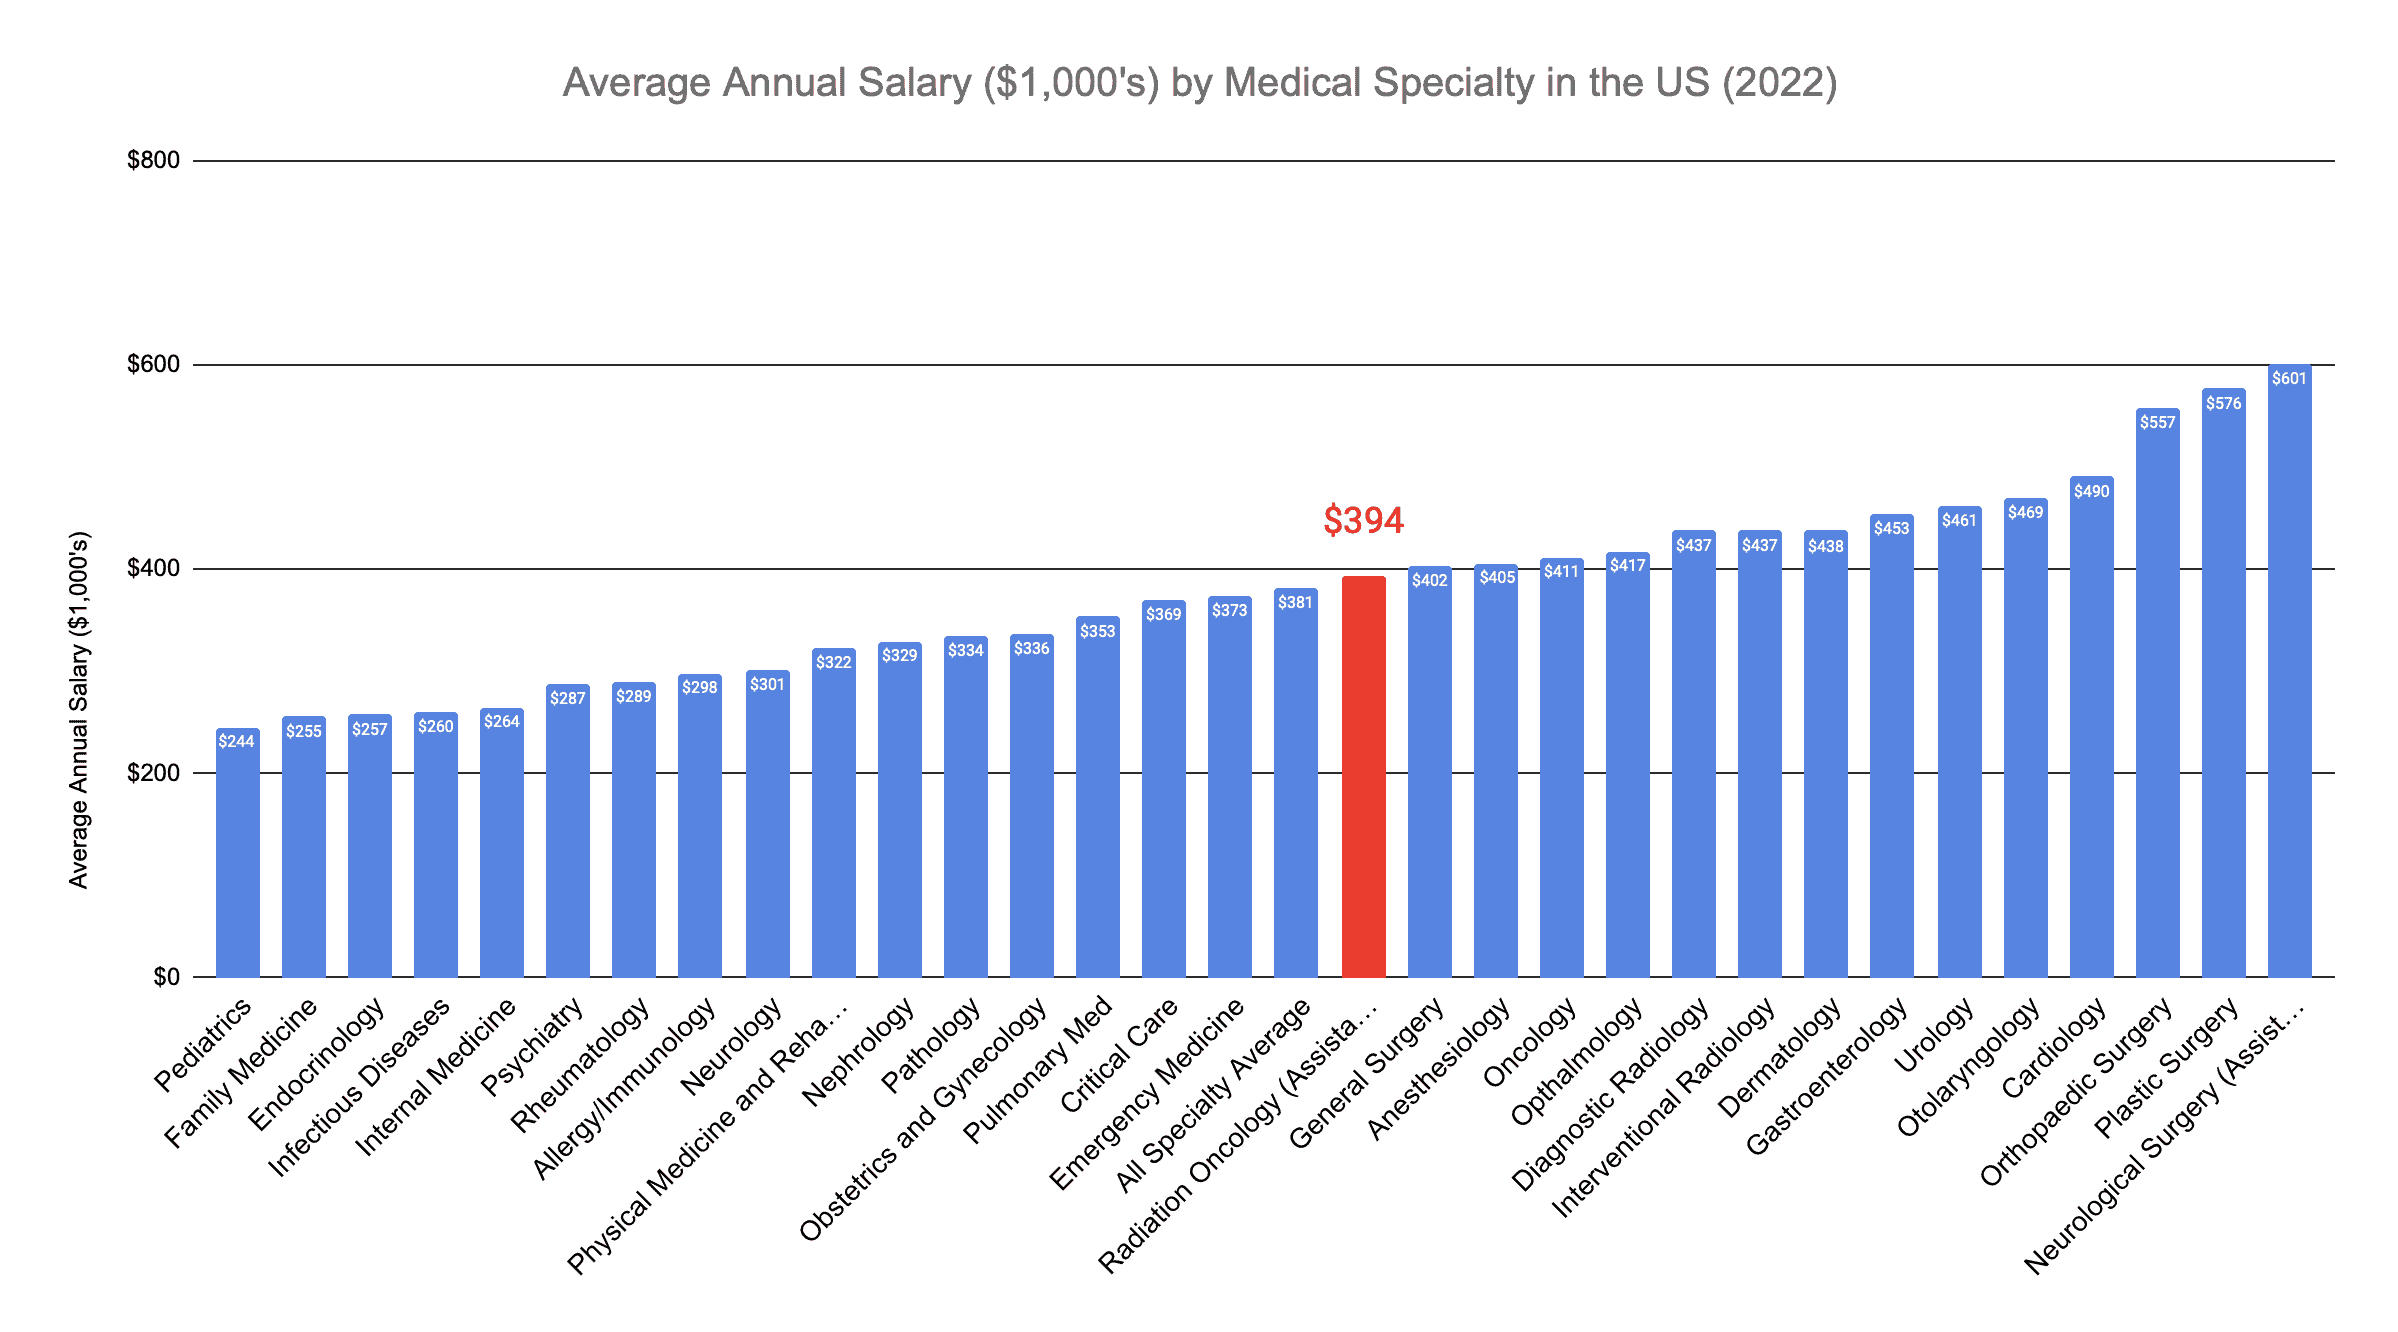 Radiation Oncologist Annual Salary